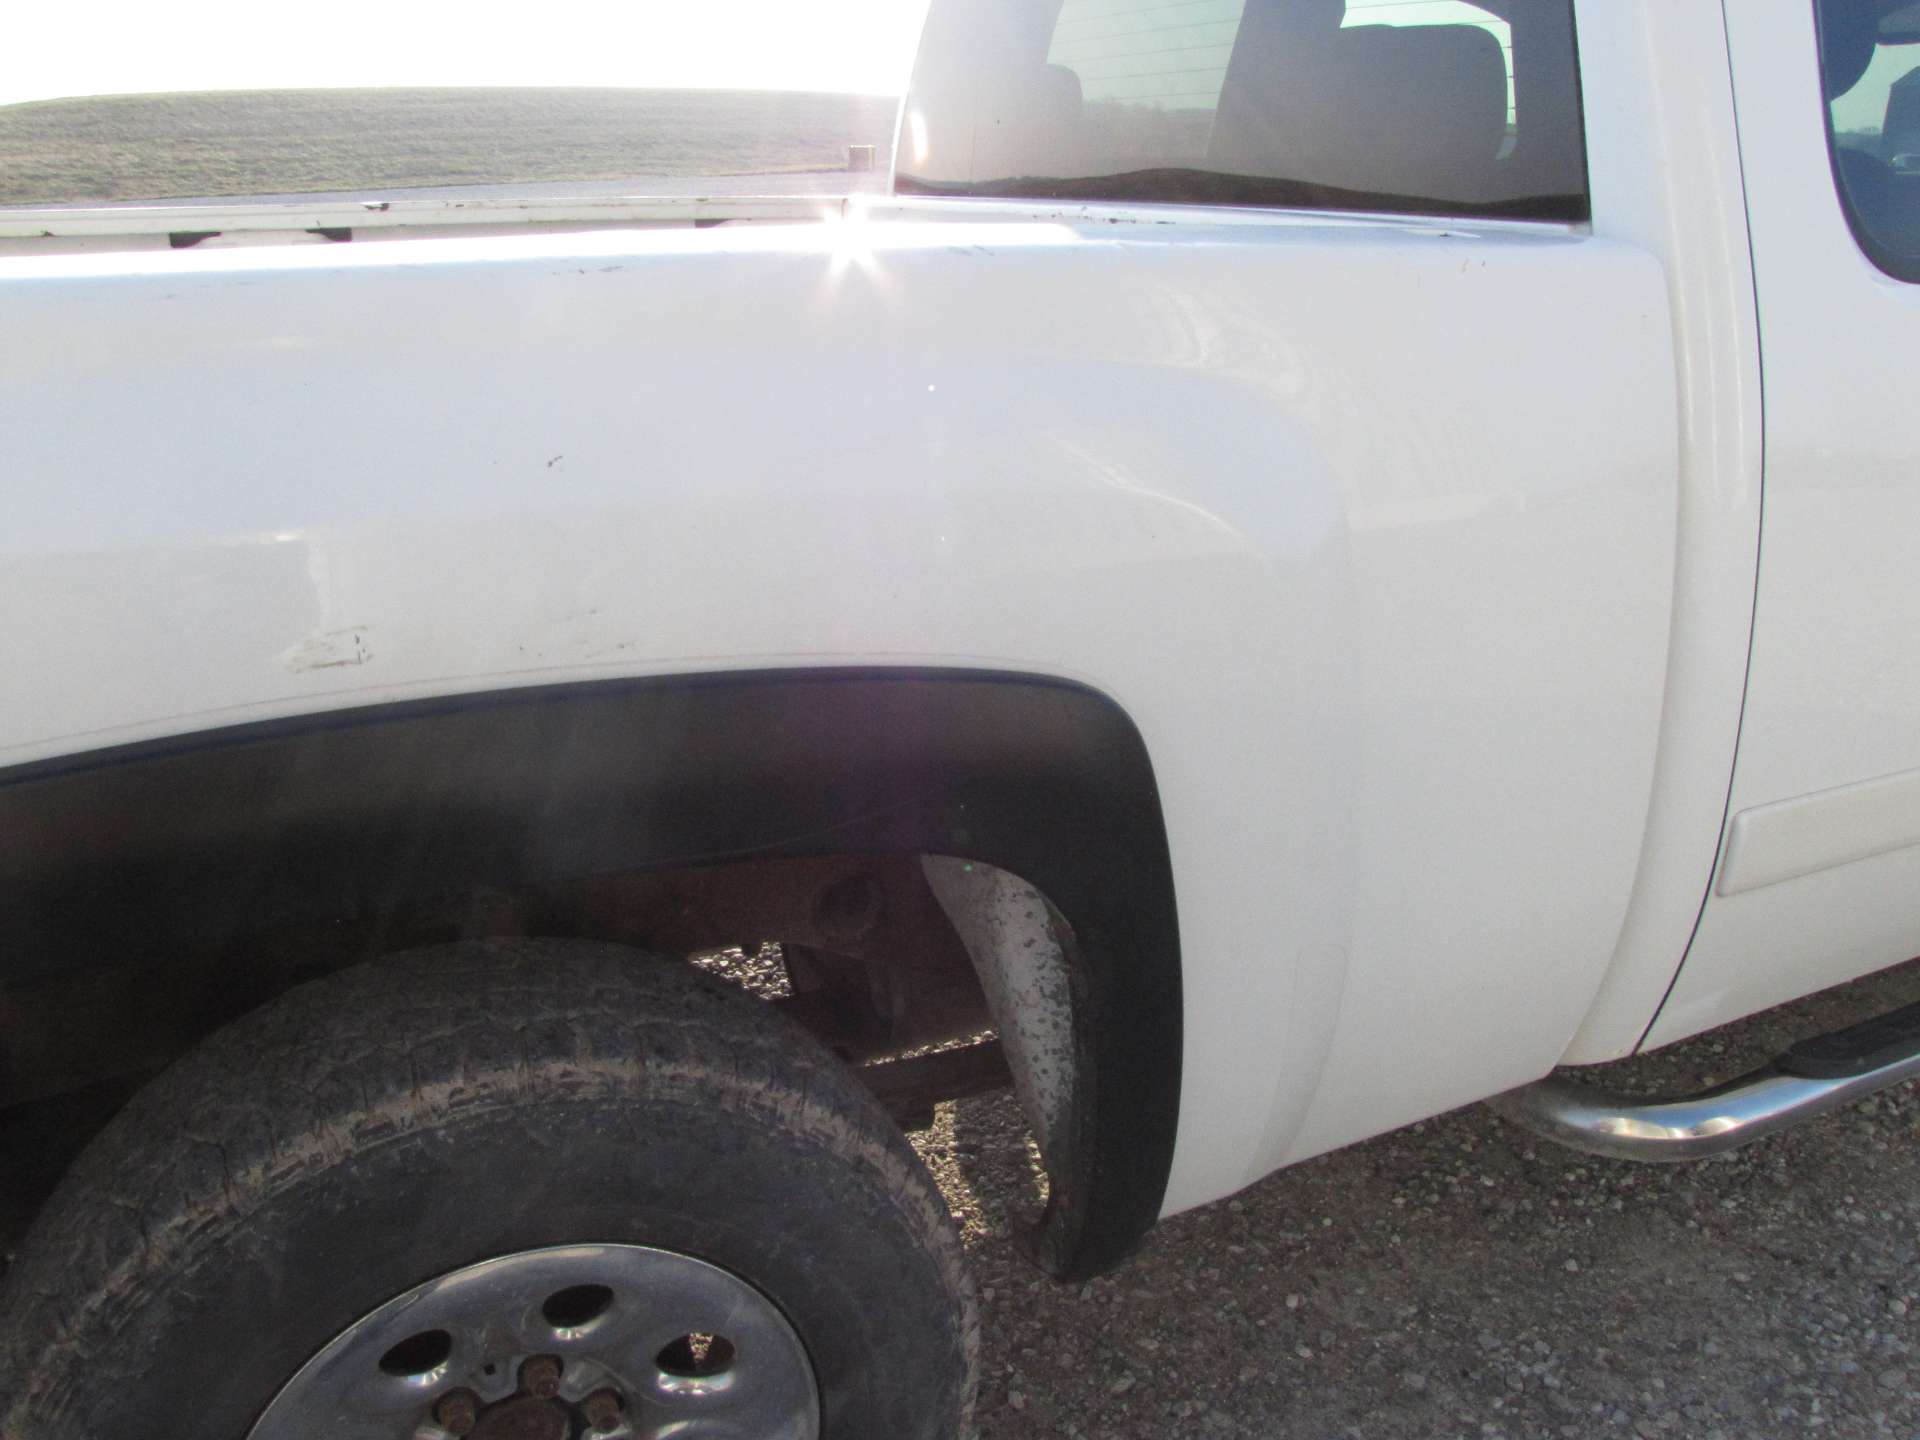 2008 Chevy Silverado 1500 LT Pickup Truck (CRACKED FRAME) - Image 27 of 43